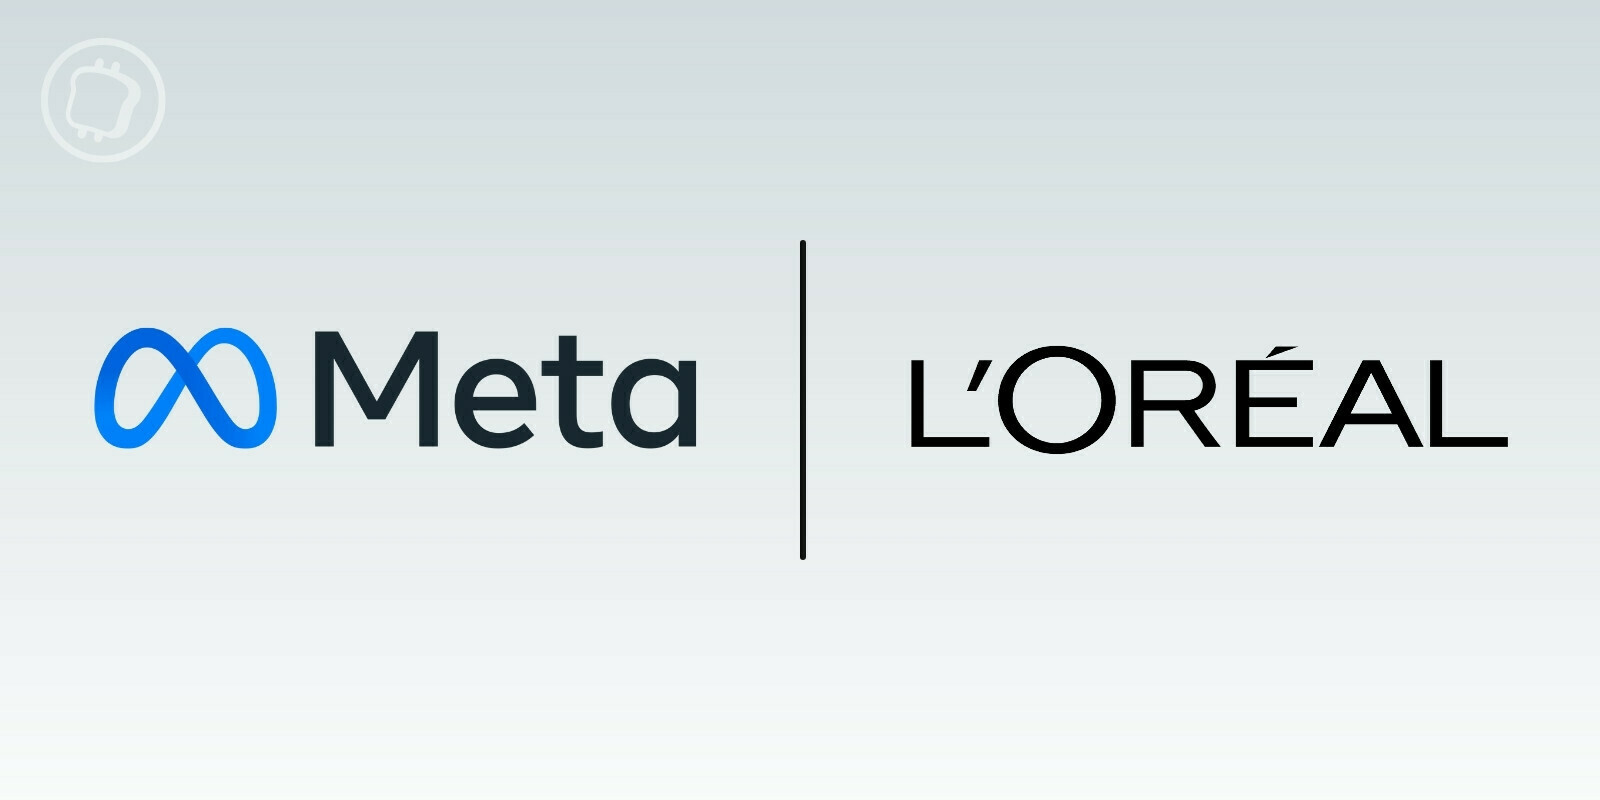 l-or-al-has-partnered-with-meta-to-support-french-startups-in-the-metaverse-bblnews